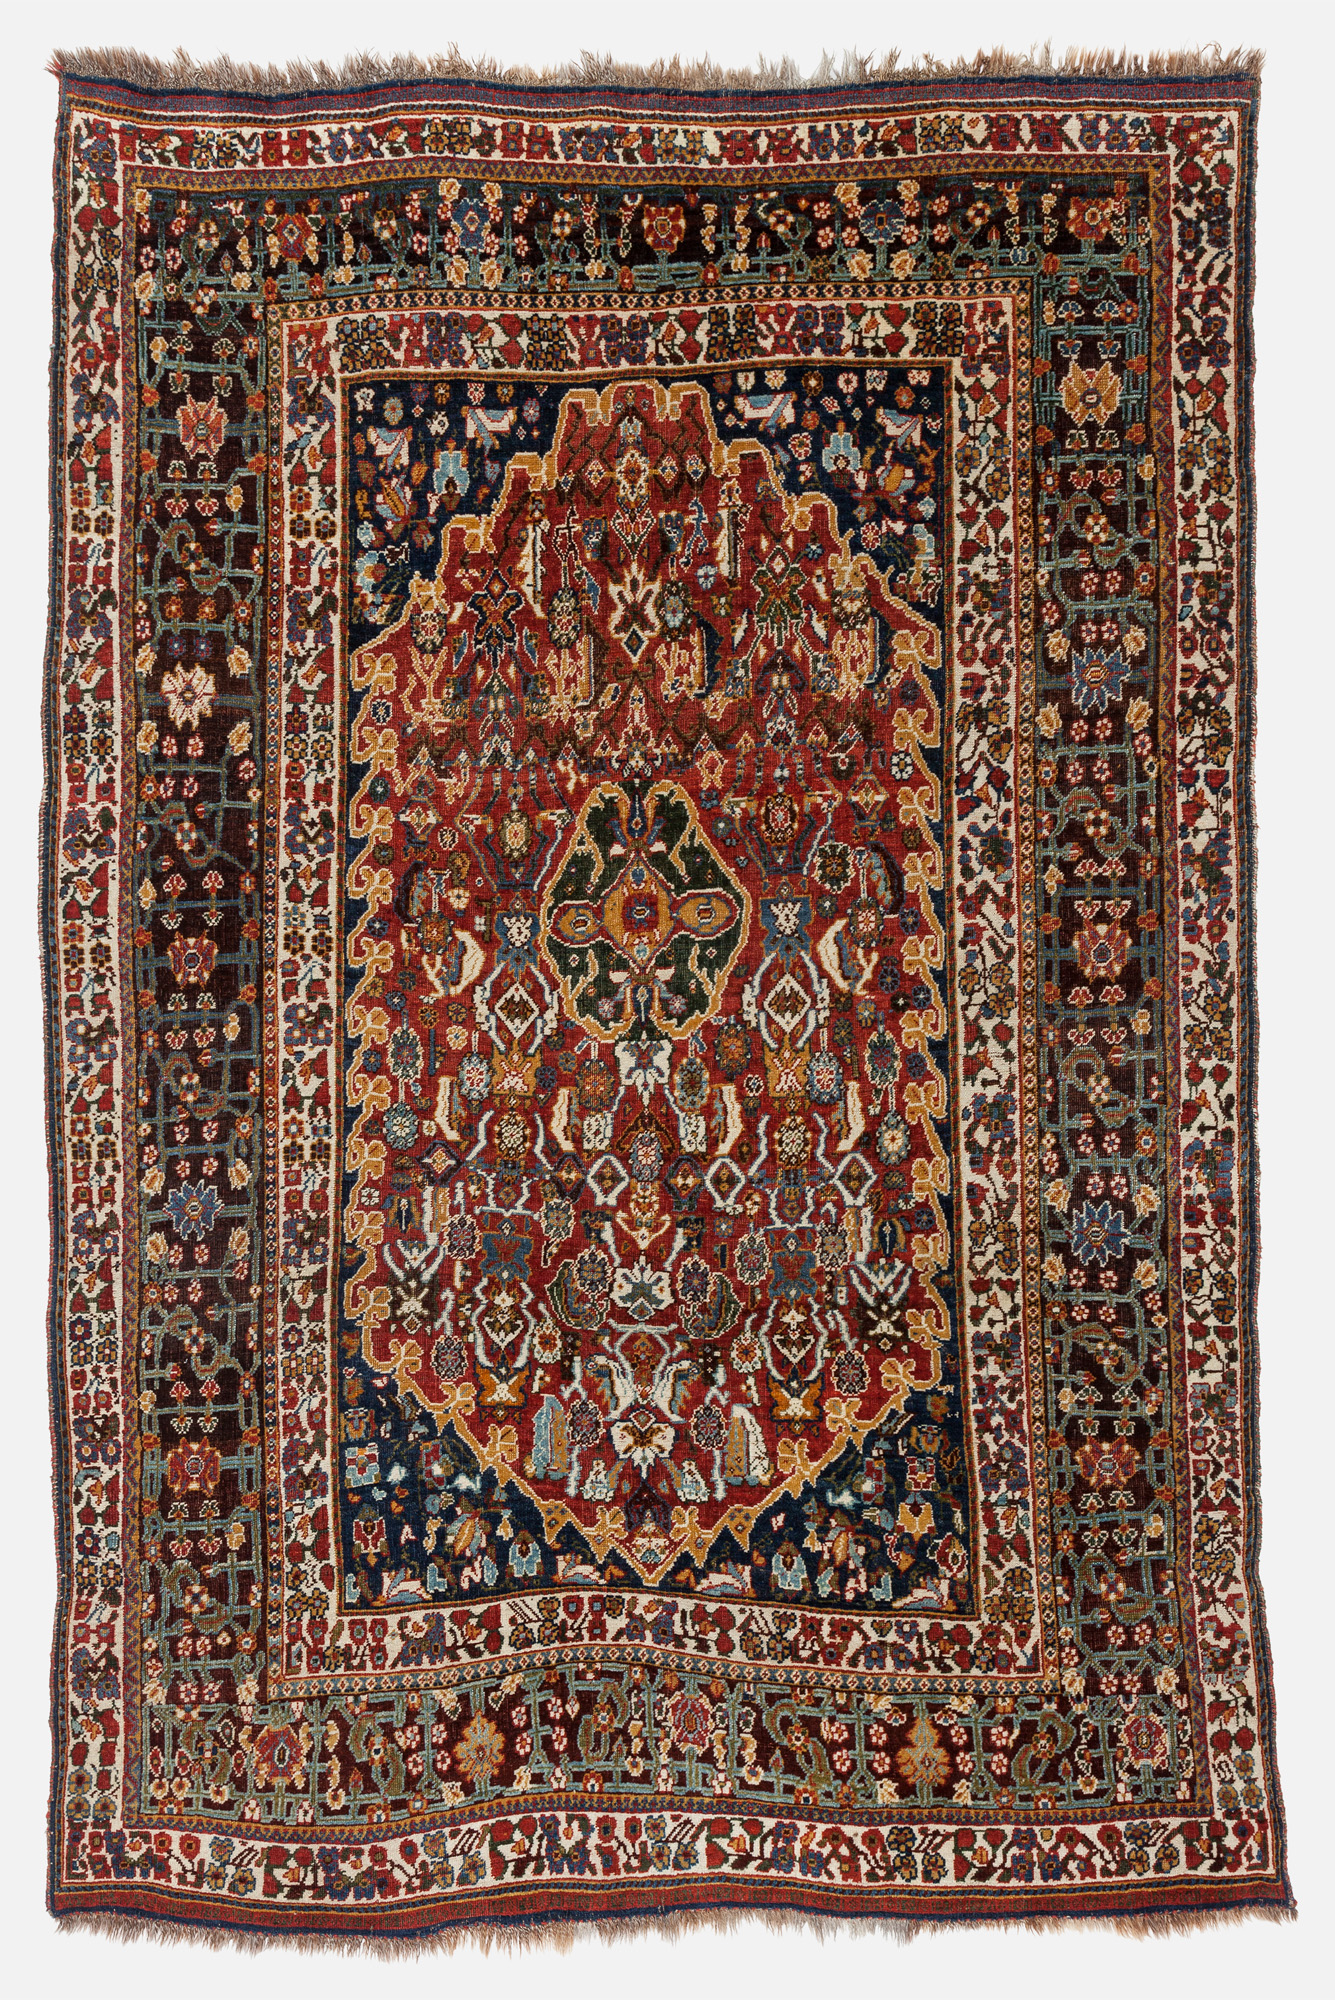 End XIX century persian Qashqai' cm 218x146 never repaired. Top condition. Wool on wool with stunning colors